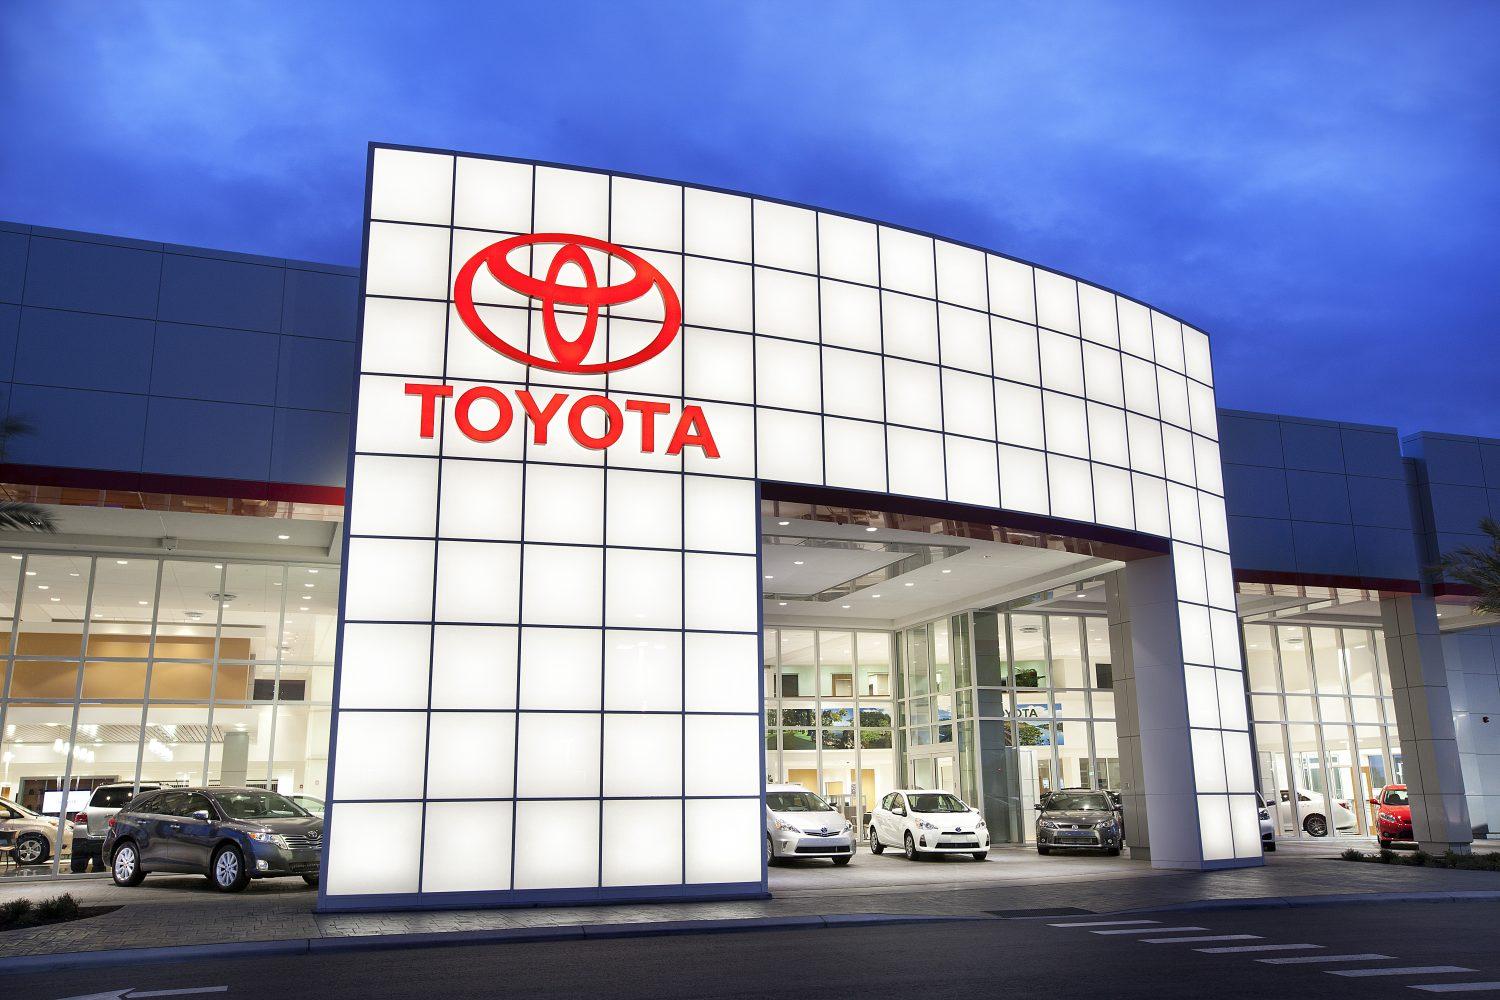 Toyota will be cutting global production by 40% beginning in September.